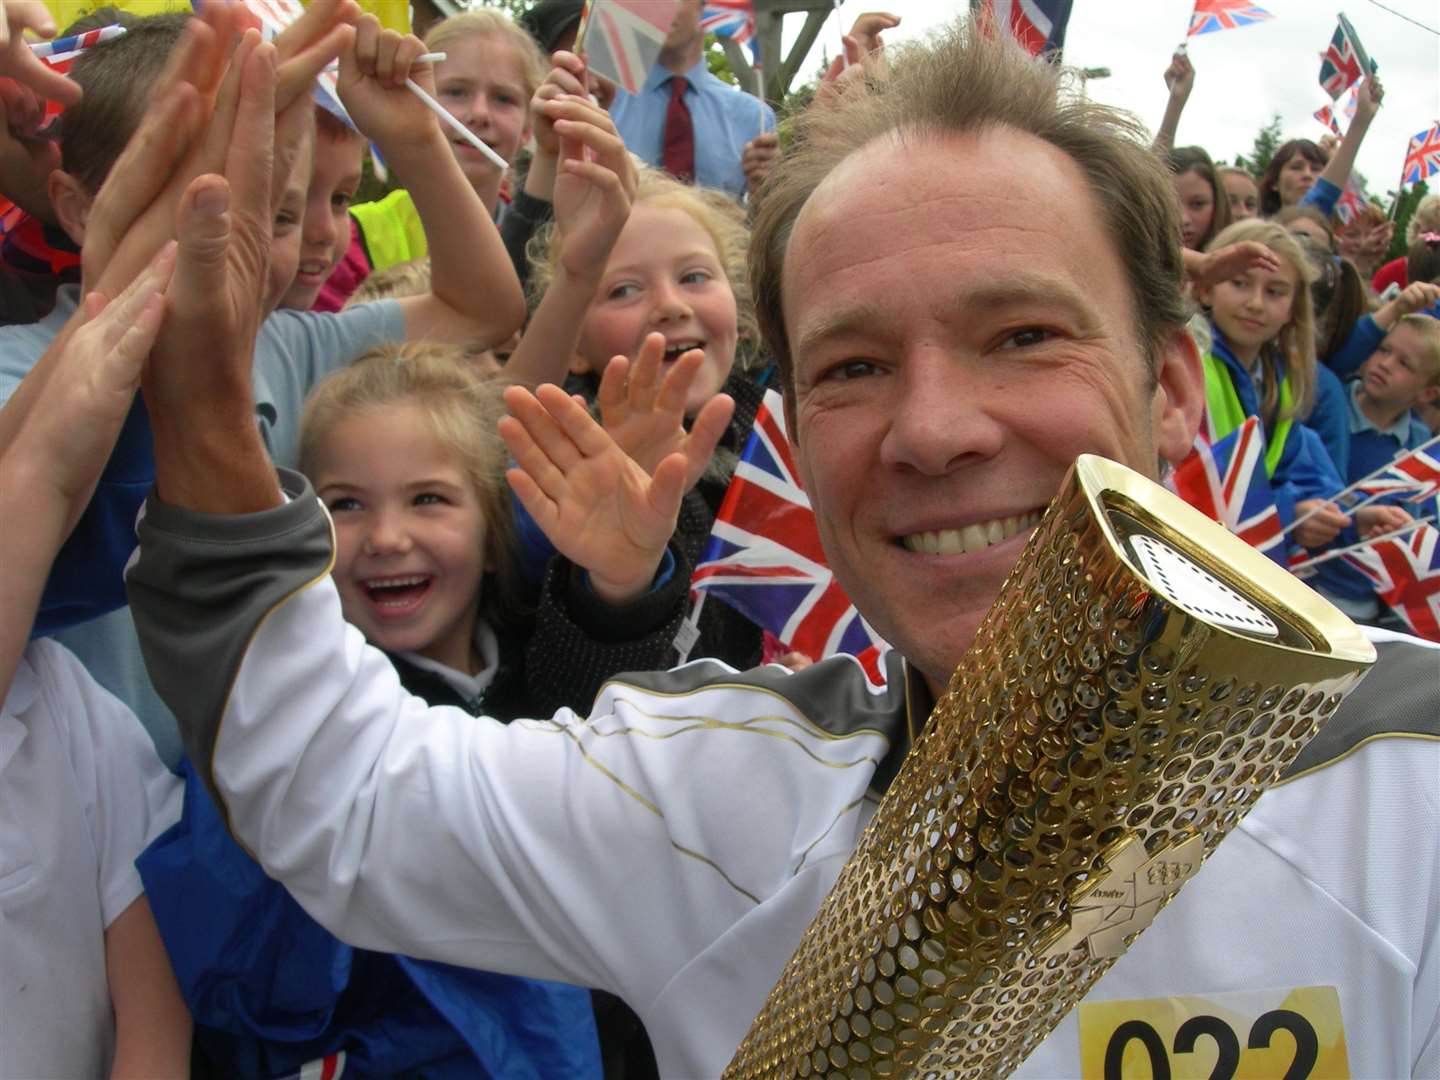 Ben Afforselles who carried the Olympic torch in his home village of Hamstreet